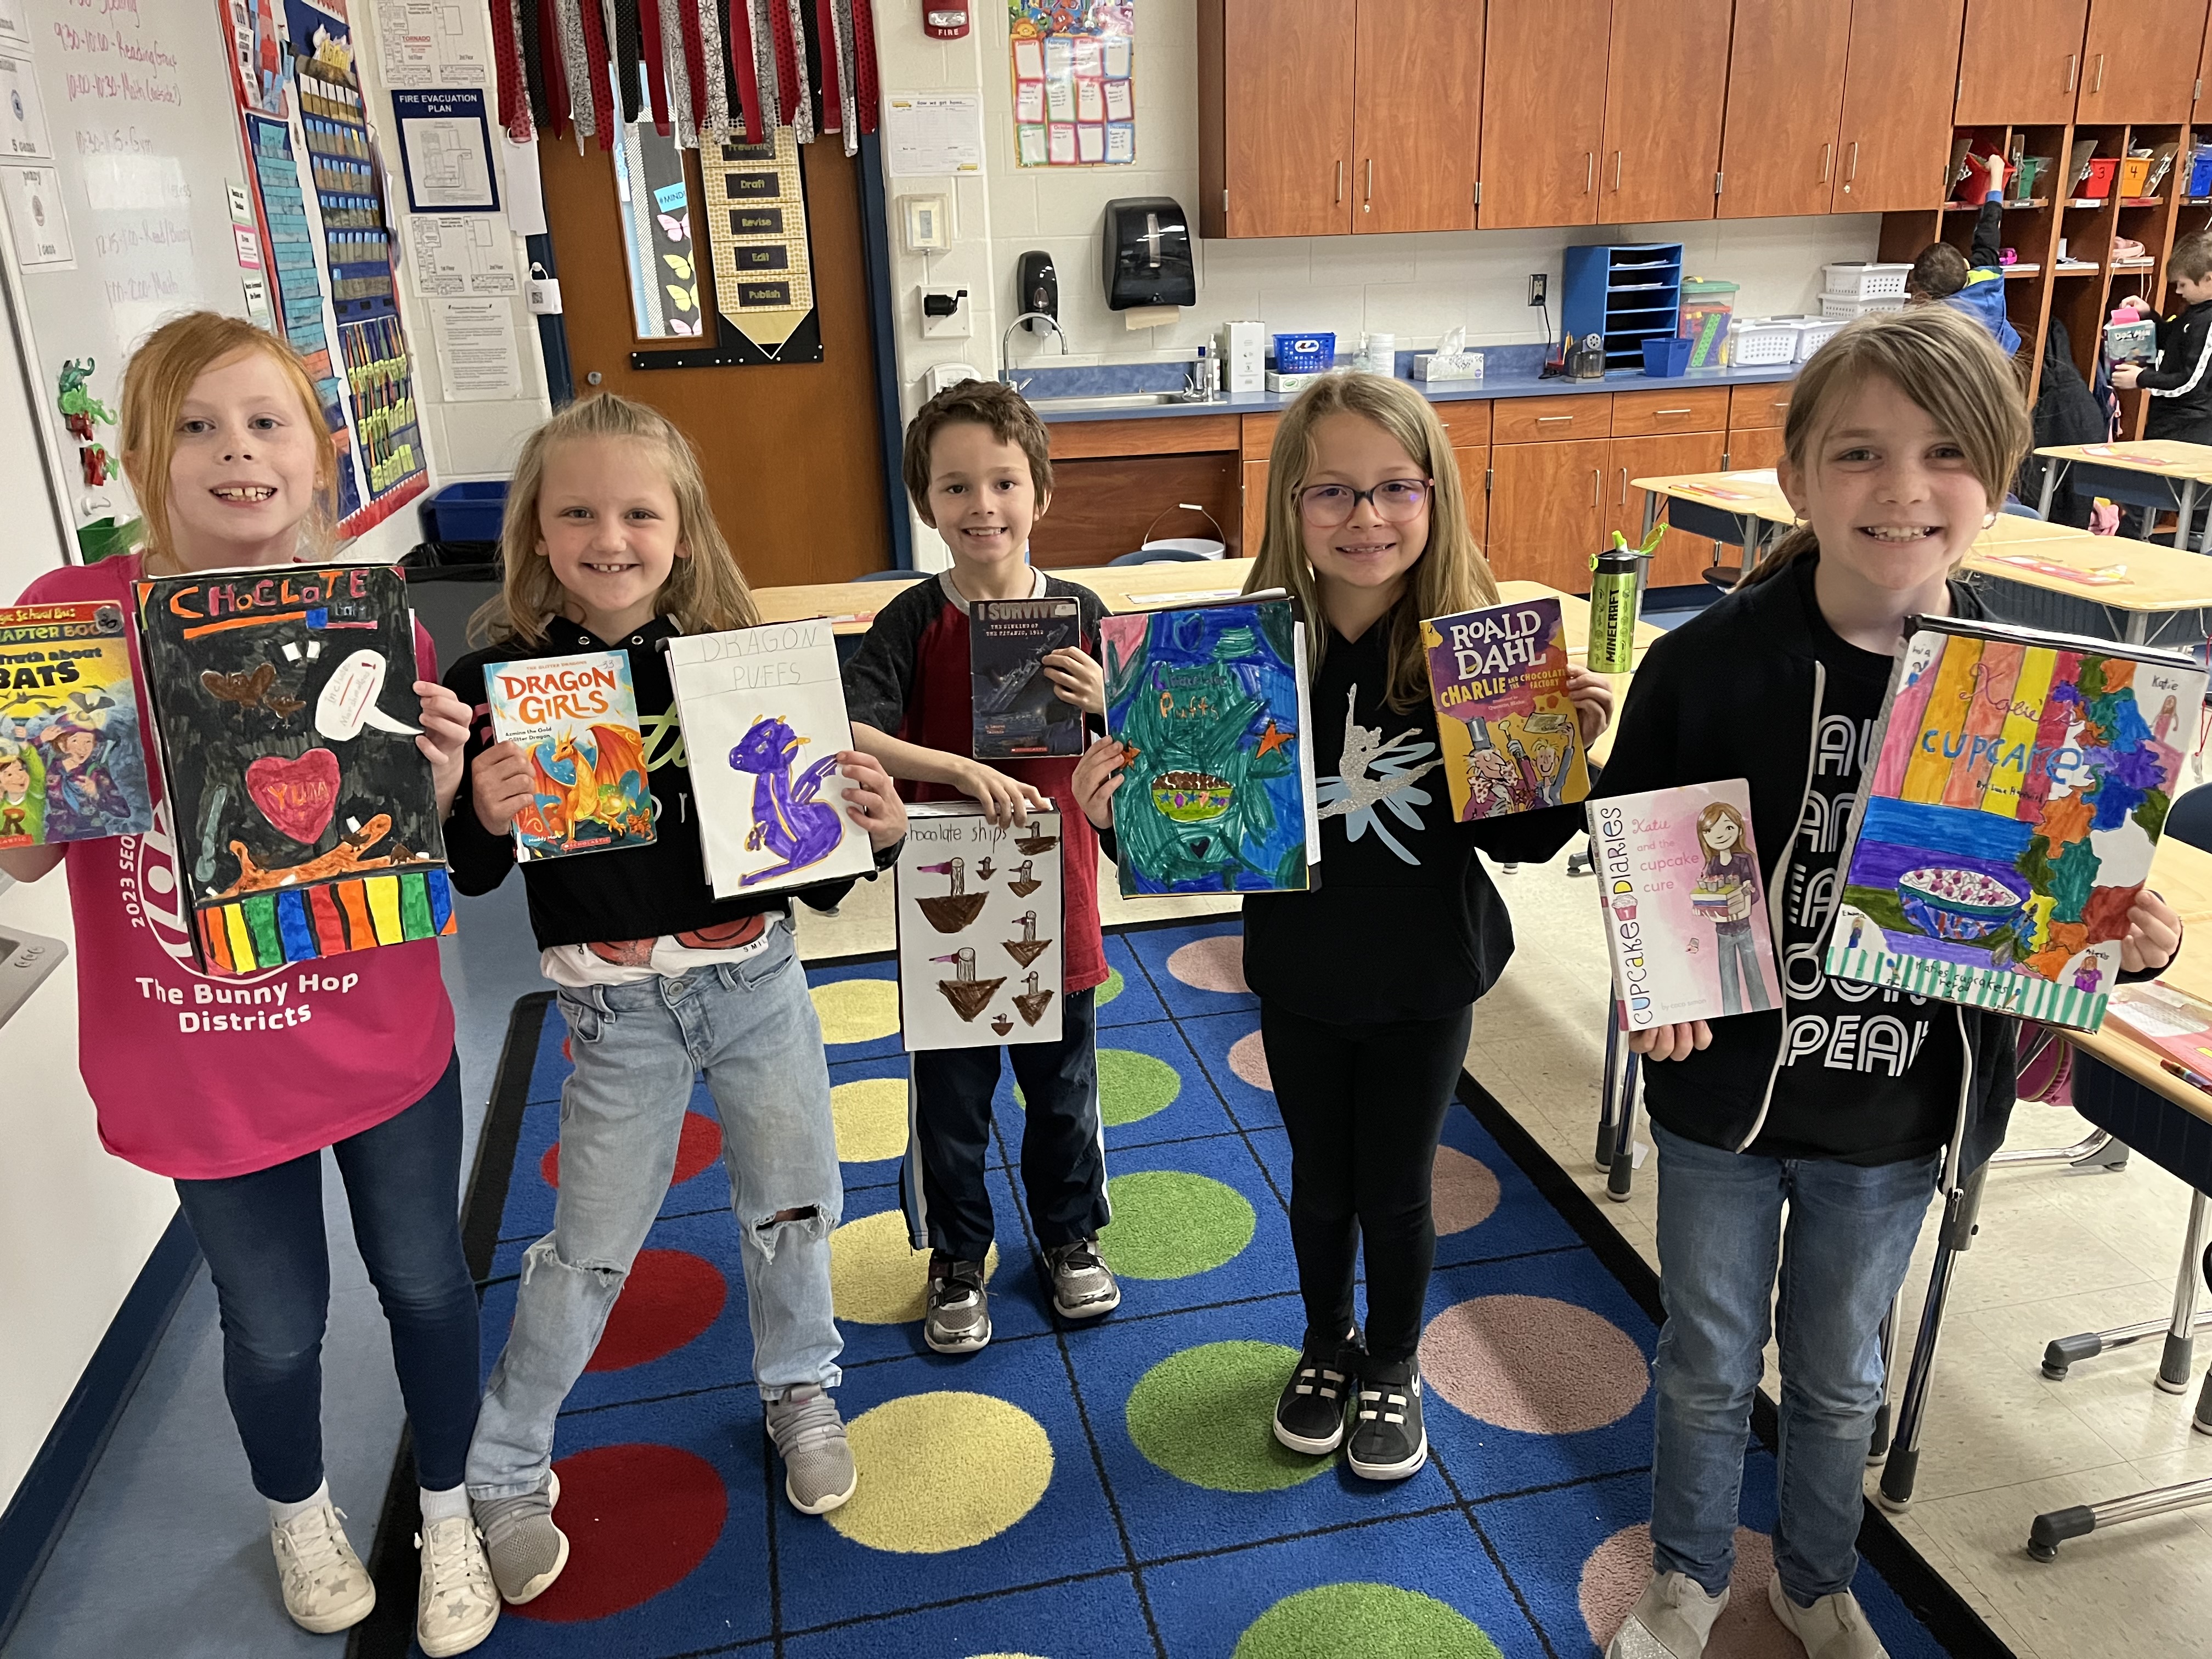 Five students pictured with their cereal box book reports